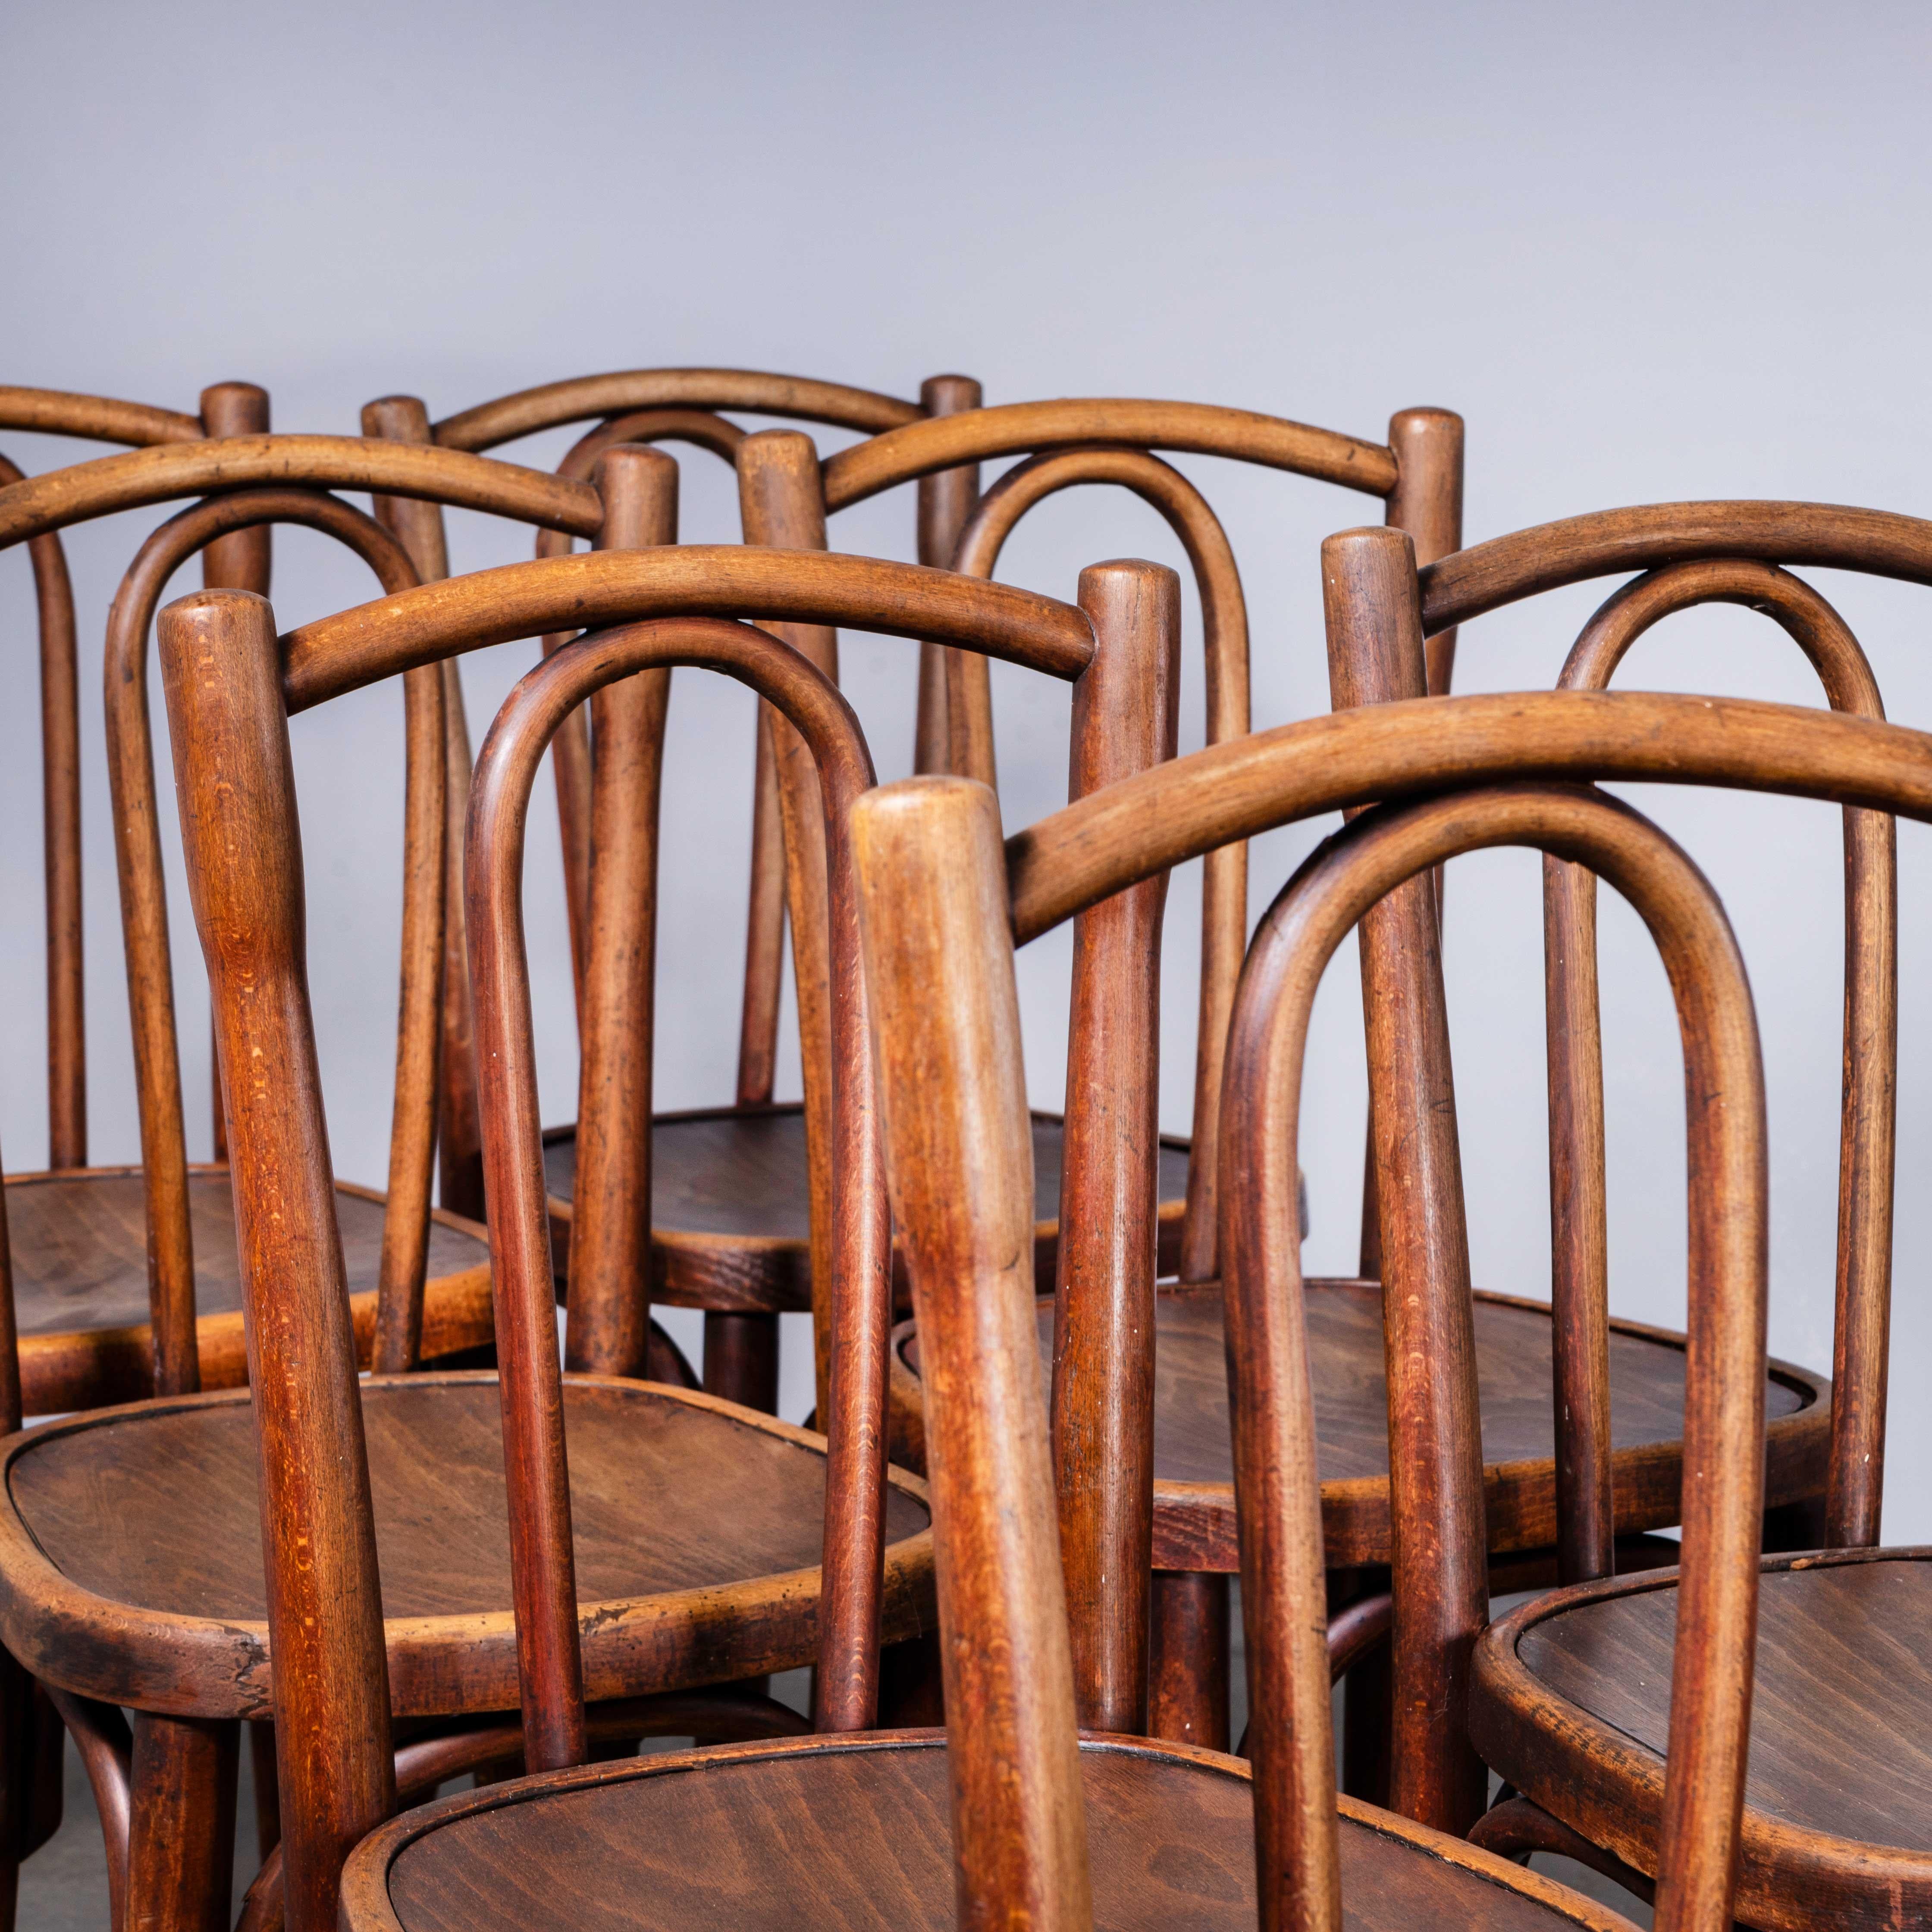 1940’s Fischel French Bentwood Dining Chairs – Set Of Ten
1940’s Fischel French Bentwood Dining Chairs – Set Of Ten. The process of steam bending beech to create elegant chairs was discovered and developed by Thonet, but when its patents expired in